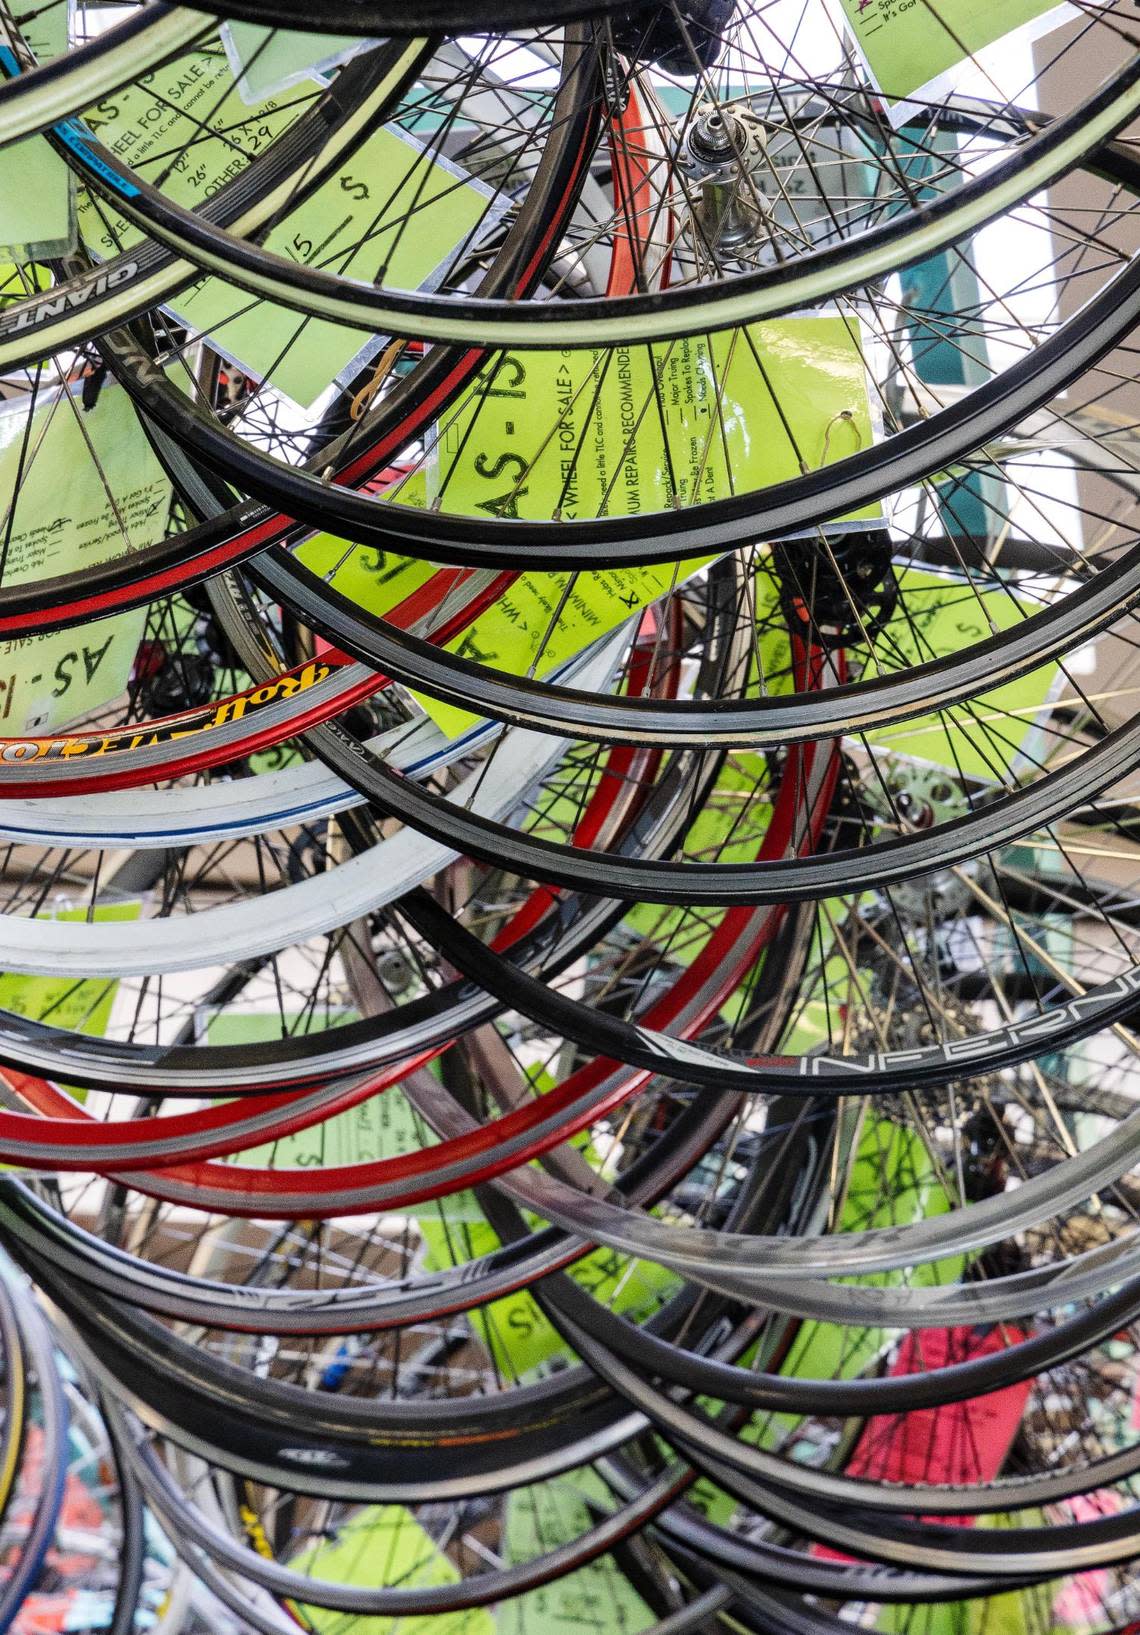 Bicycle wheels hang from the ceiling at the Boise Bicycle Project, where locals can purchase refurbished bikes or donate their own.